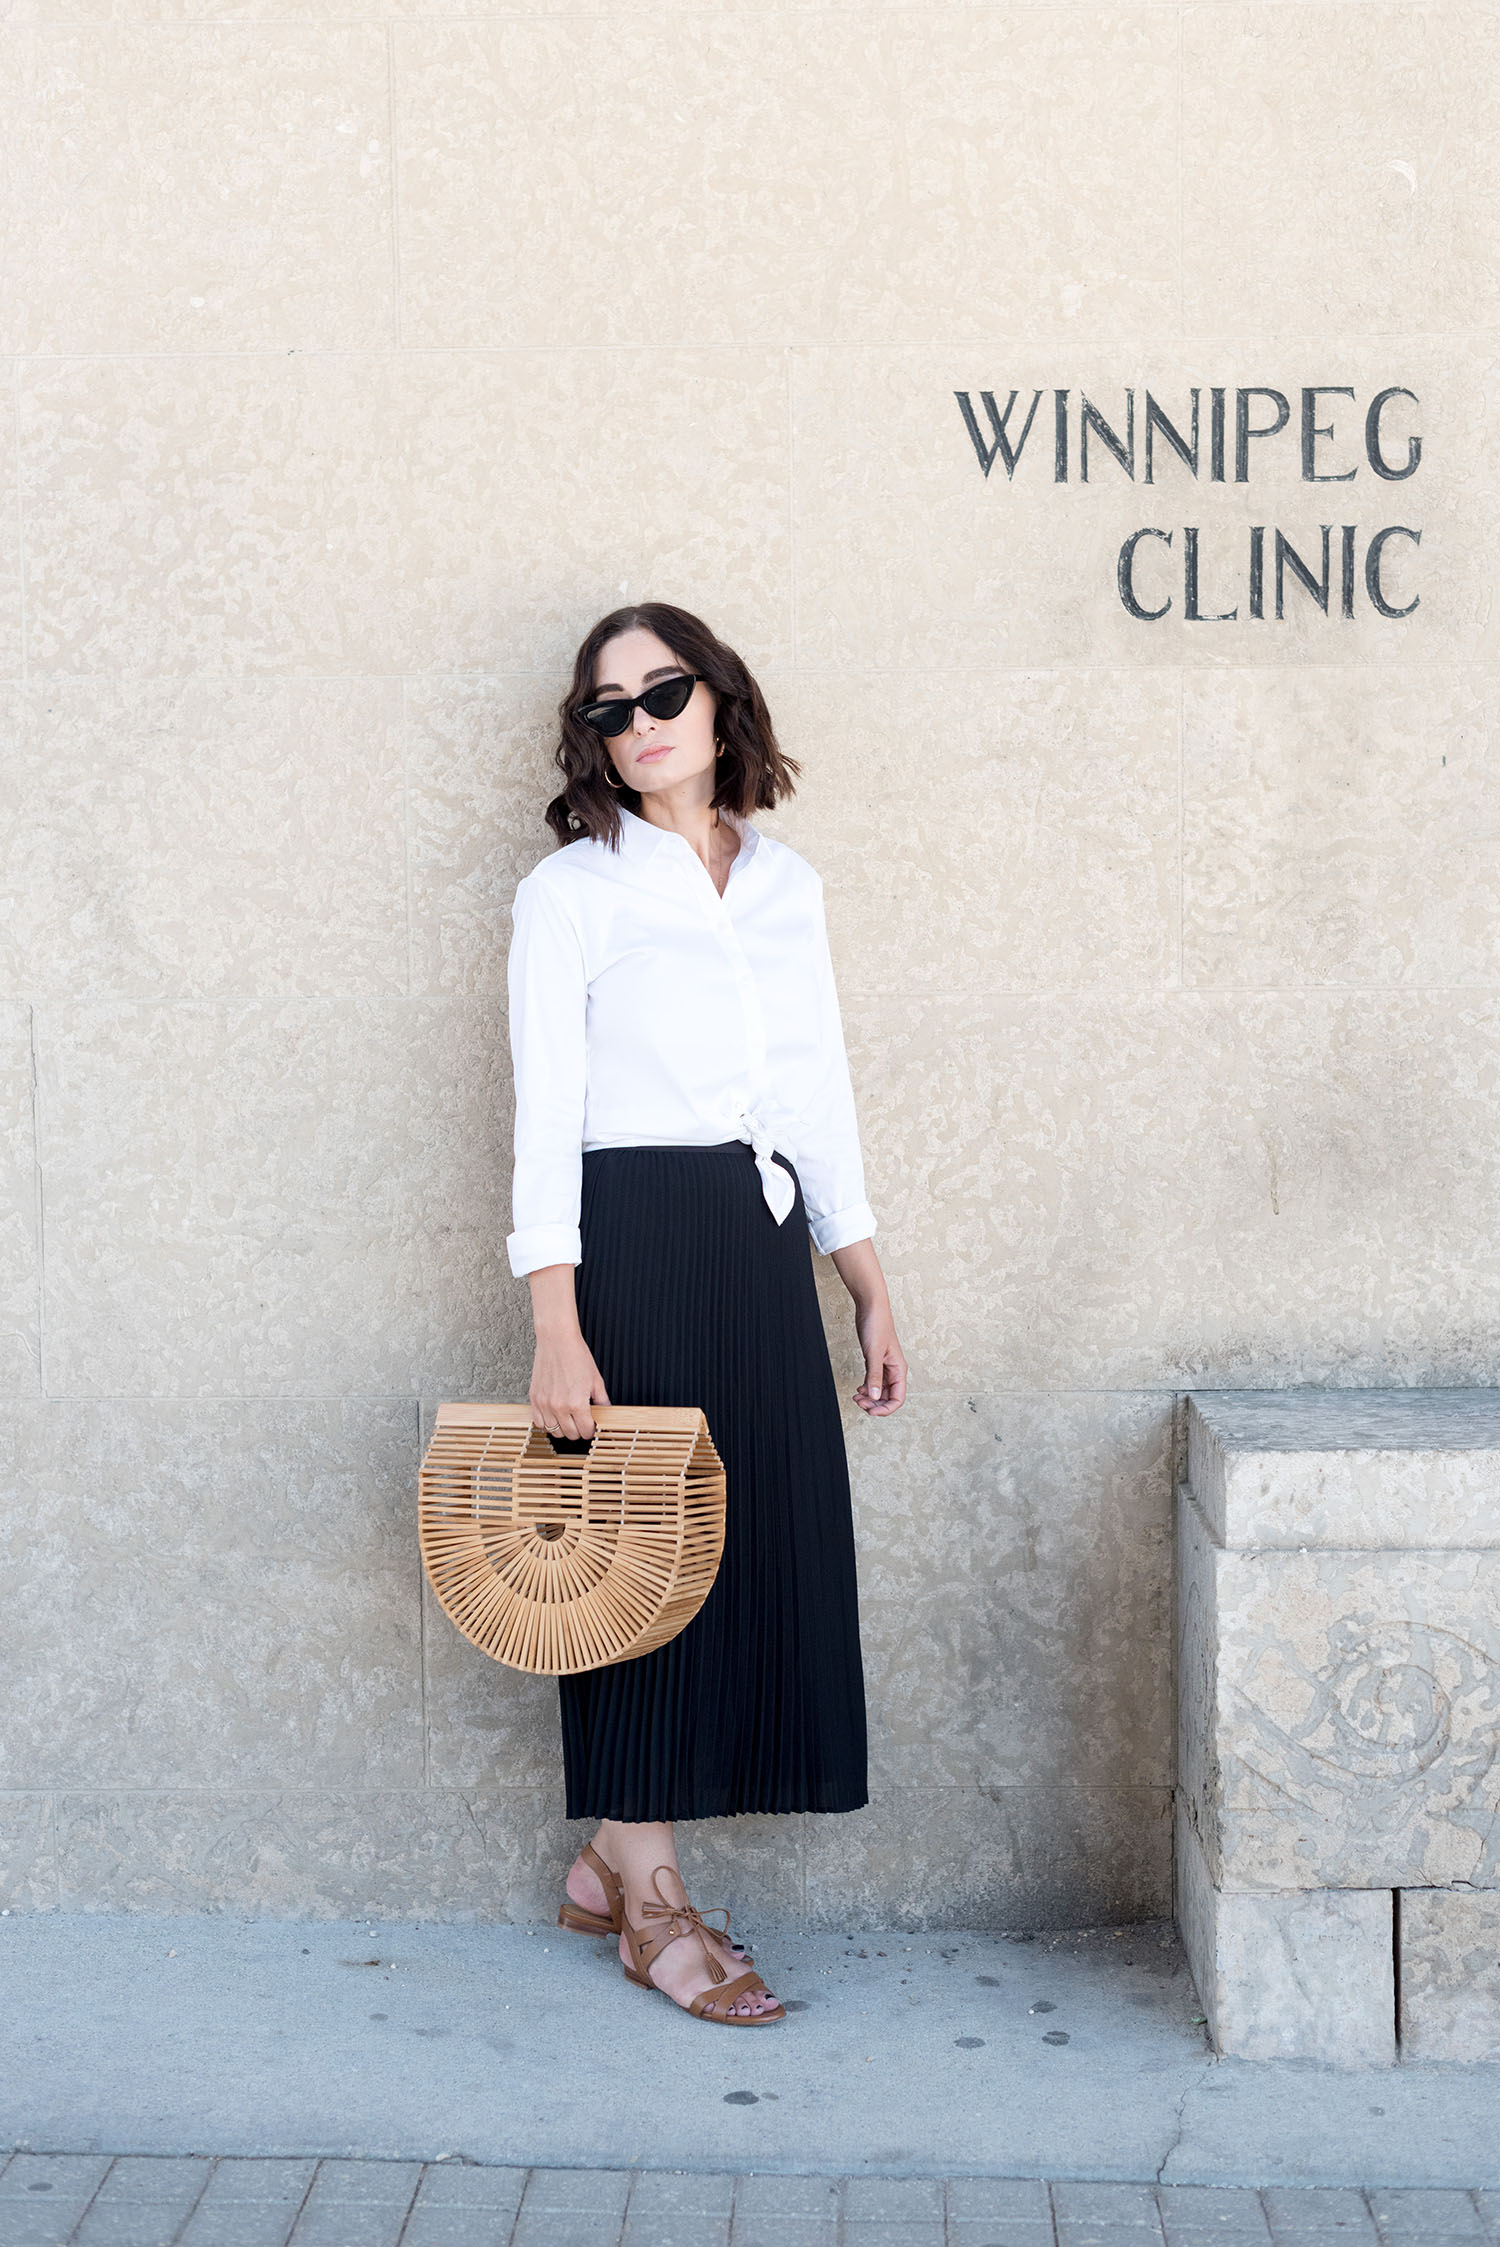 Top Winnipeg fashion blogger Cee Fardoe of Coco & Vera wears a white Uniqlo blouse and carries a vintage cage bag